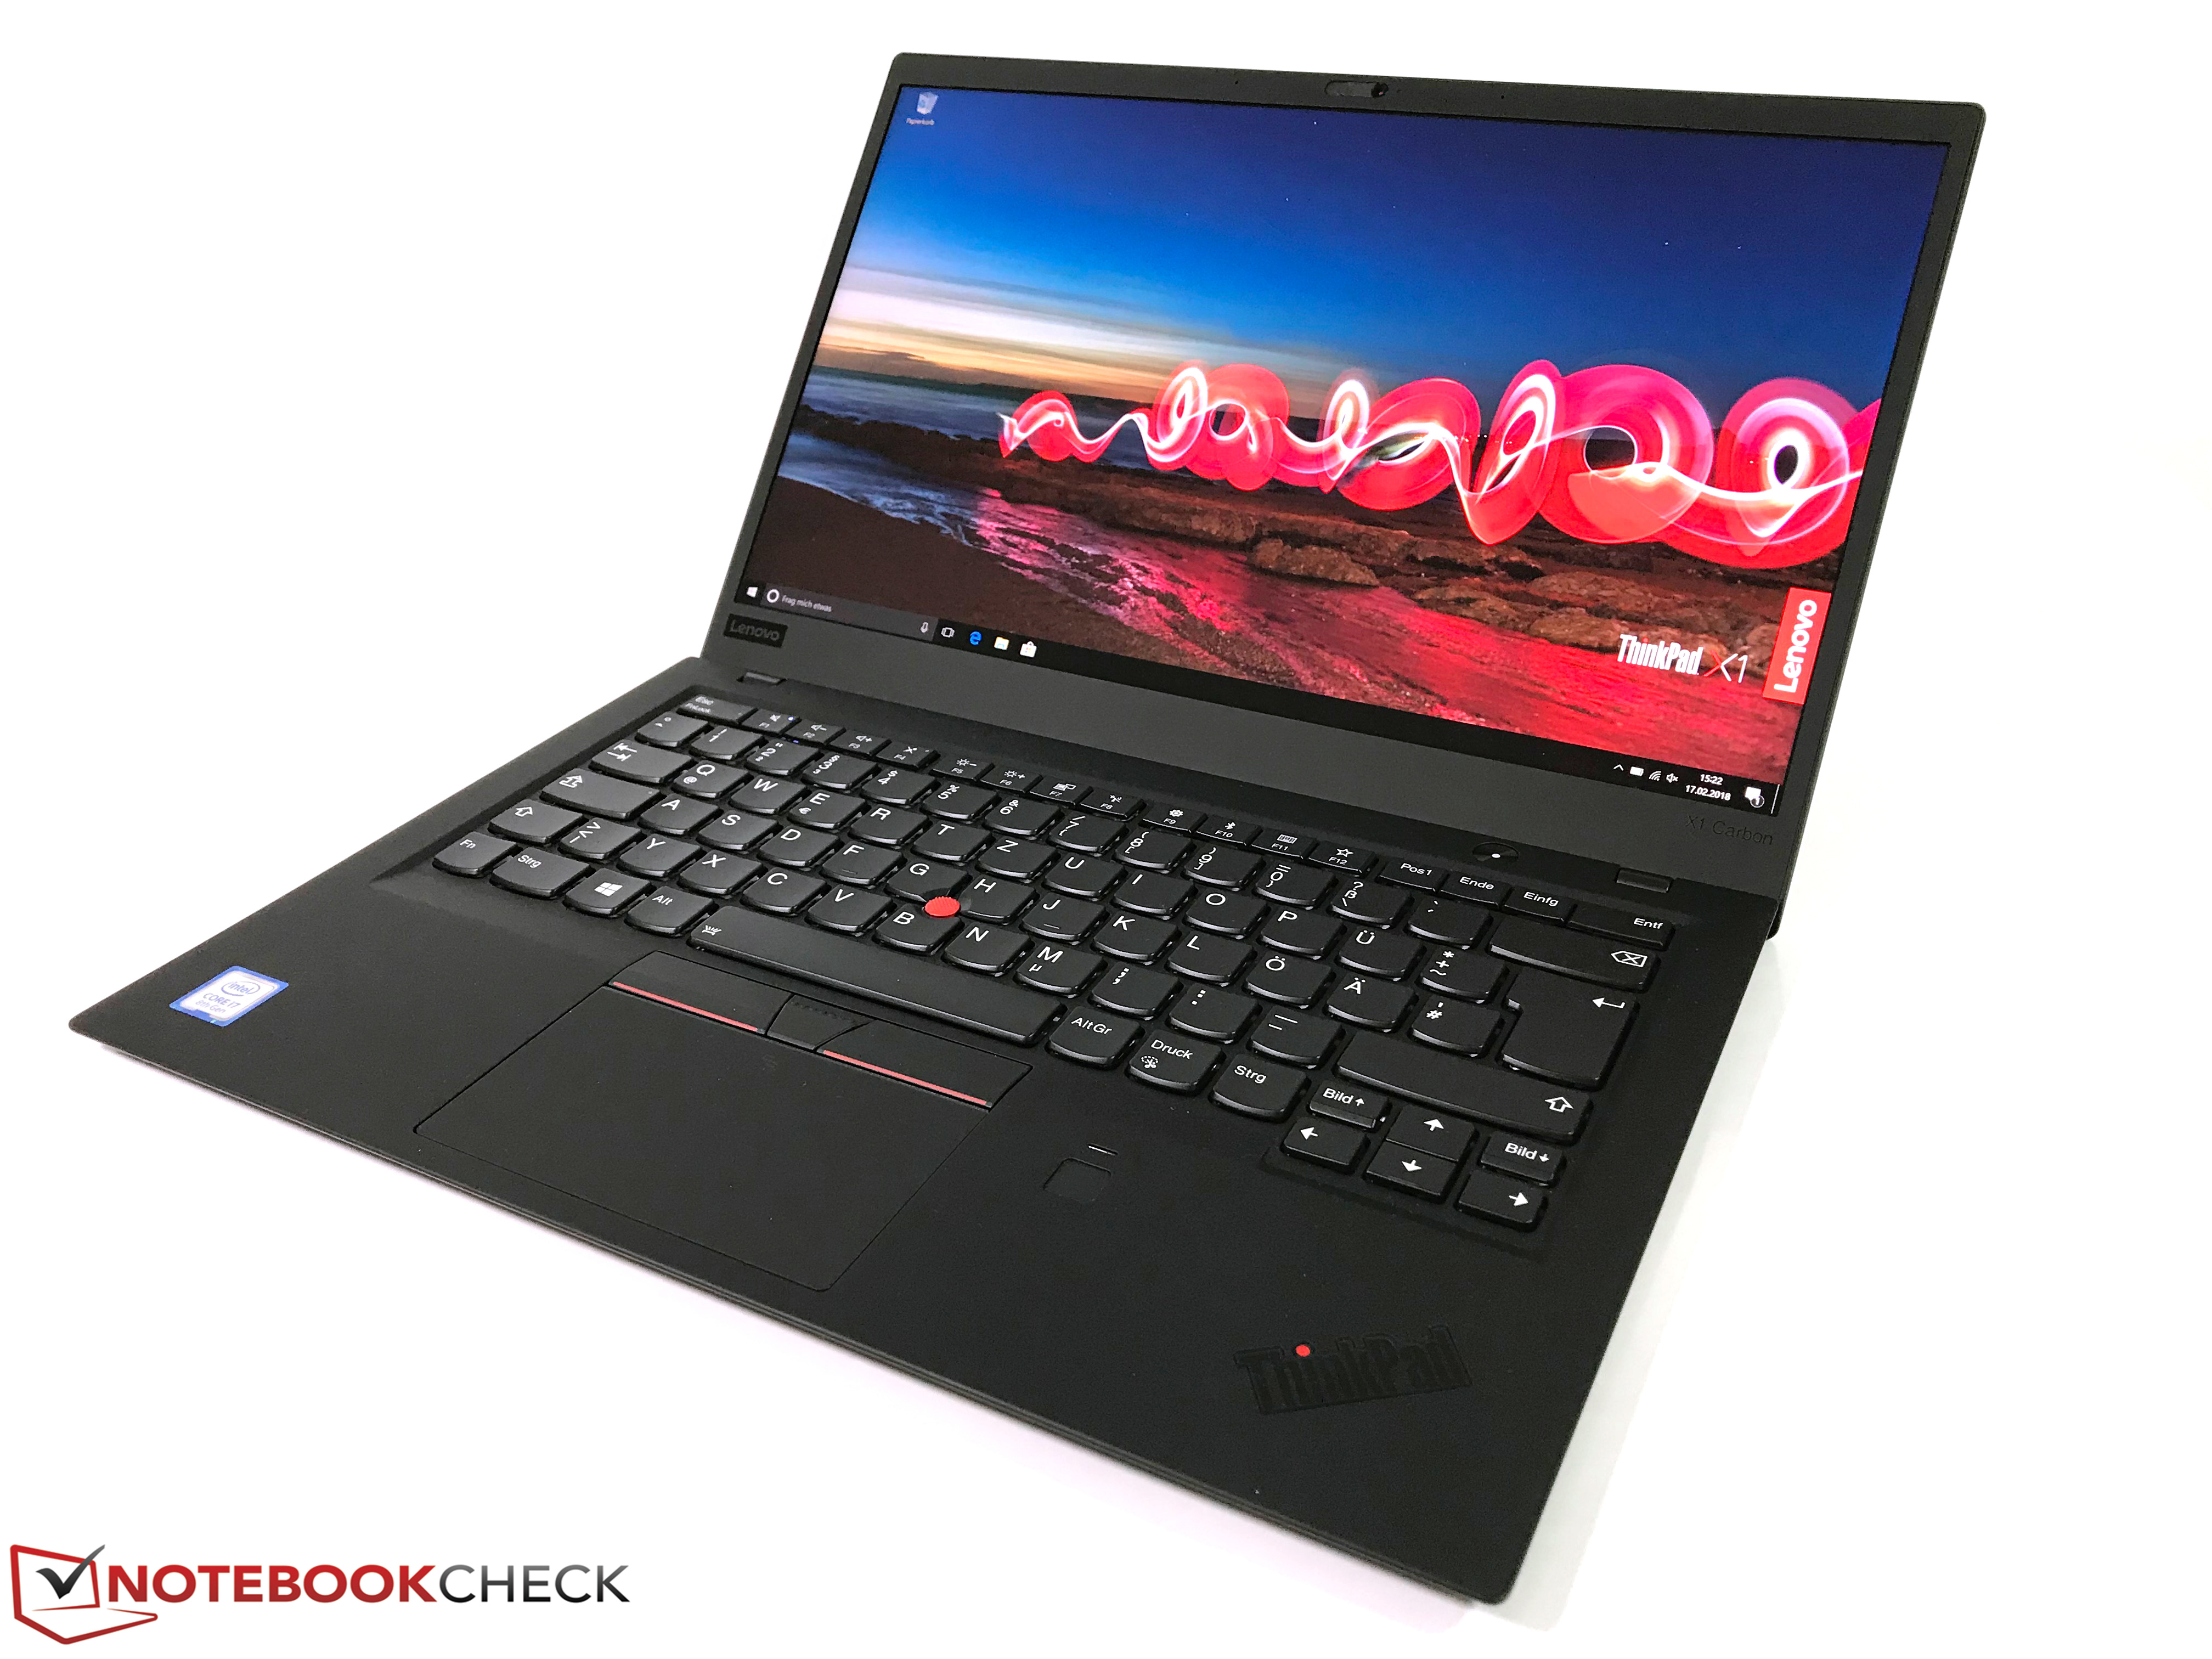 Lenovo ThinkPad X1 Carbon (2018, 2019) - An overview of all 